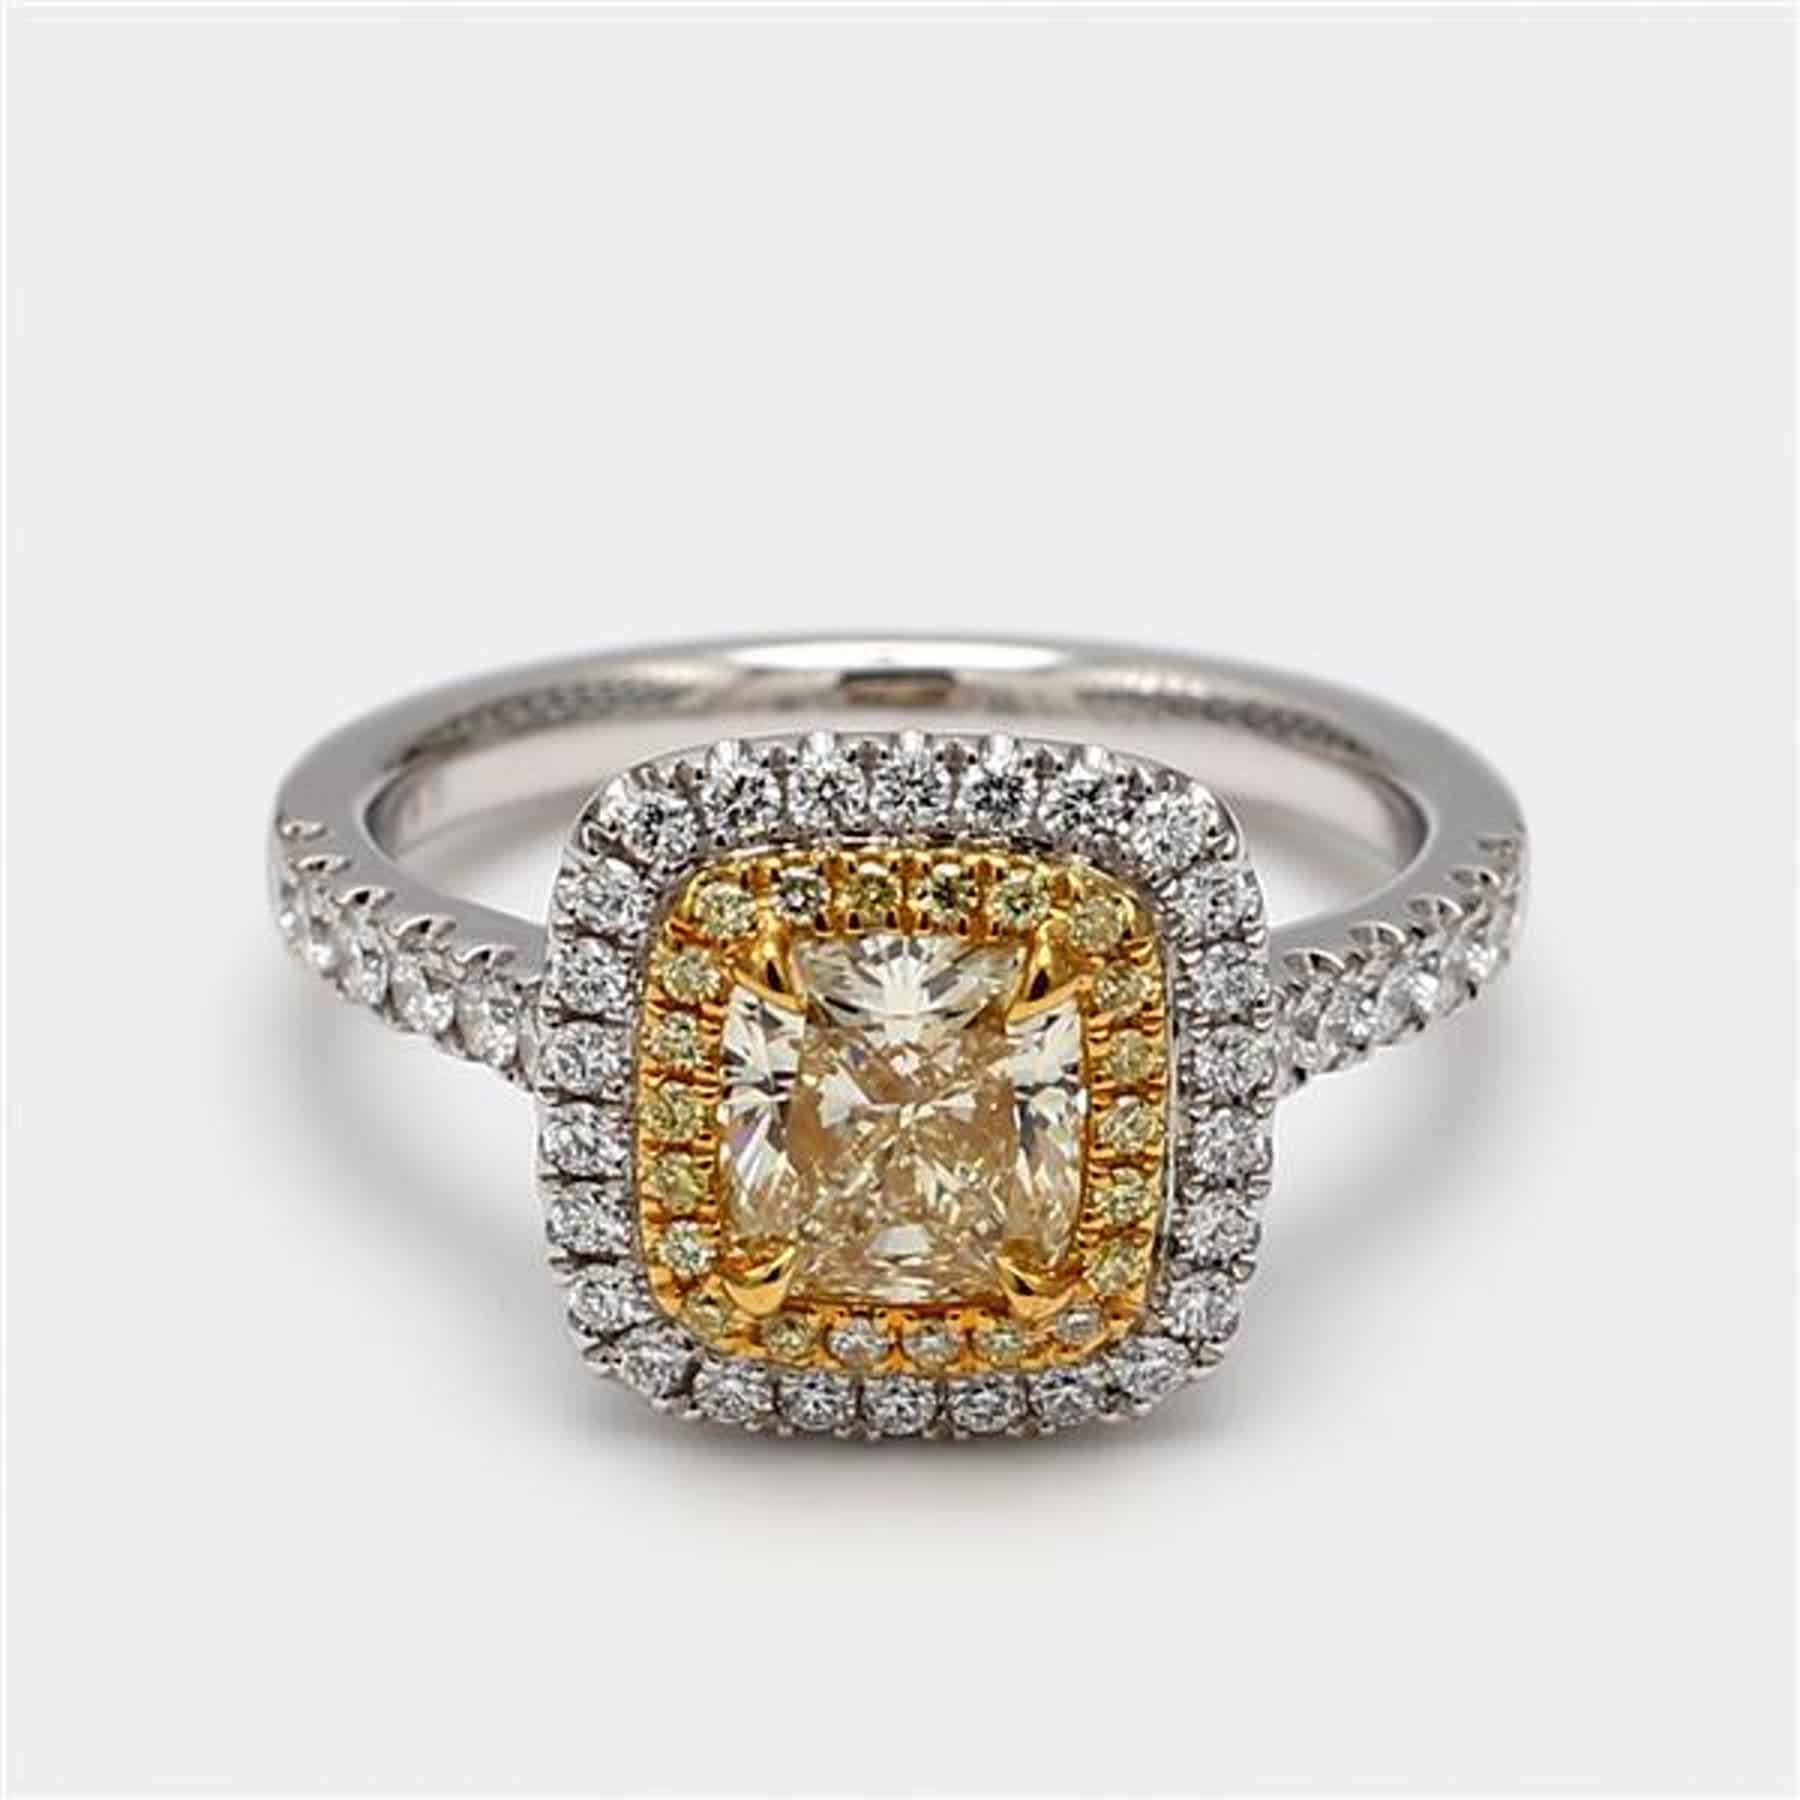 GIA certified rare square cushion natural yellow diamond surrounded with natural round white and yellow diamonds. This ring is designed to be in a simple setting. Can be used as an engagement ring or in addition to your collection of jewels. 

Total